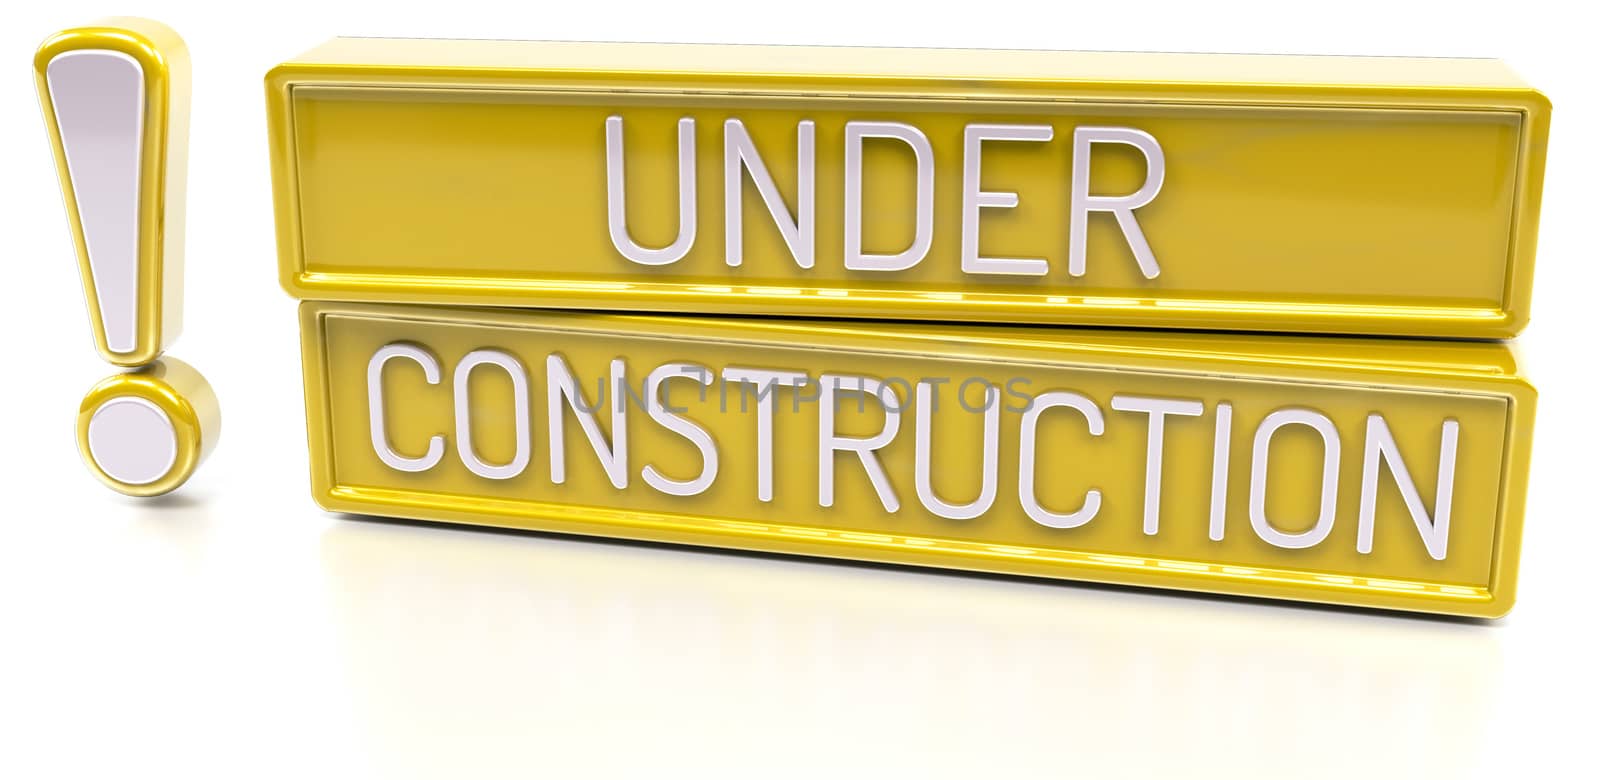 Under Construction - 3d banner, isolated on white background